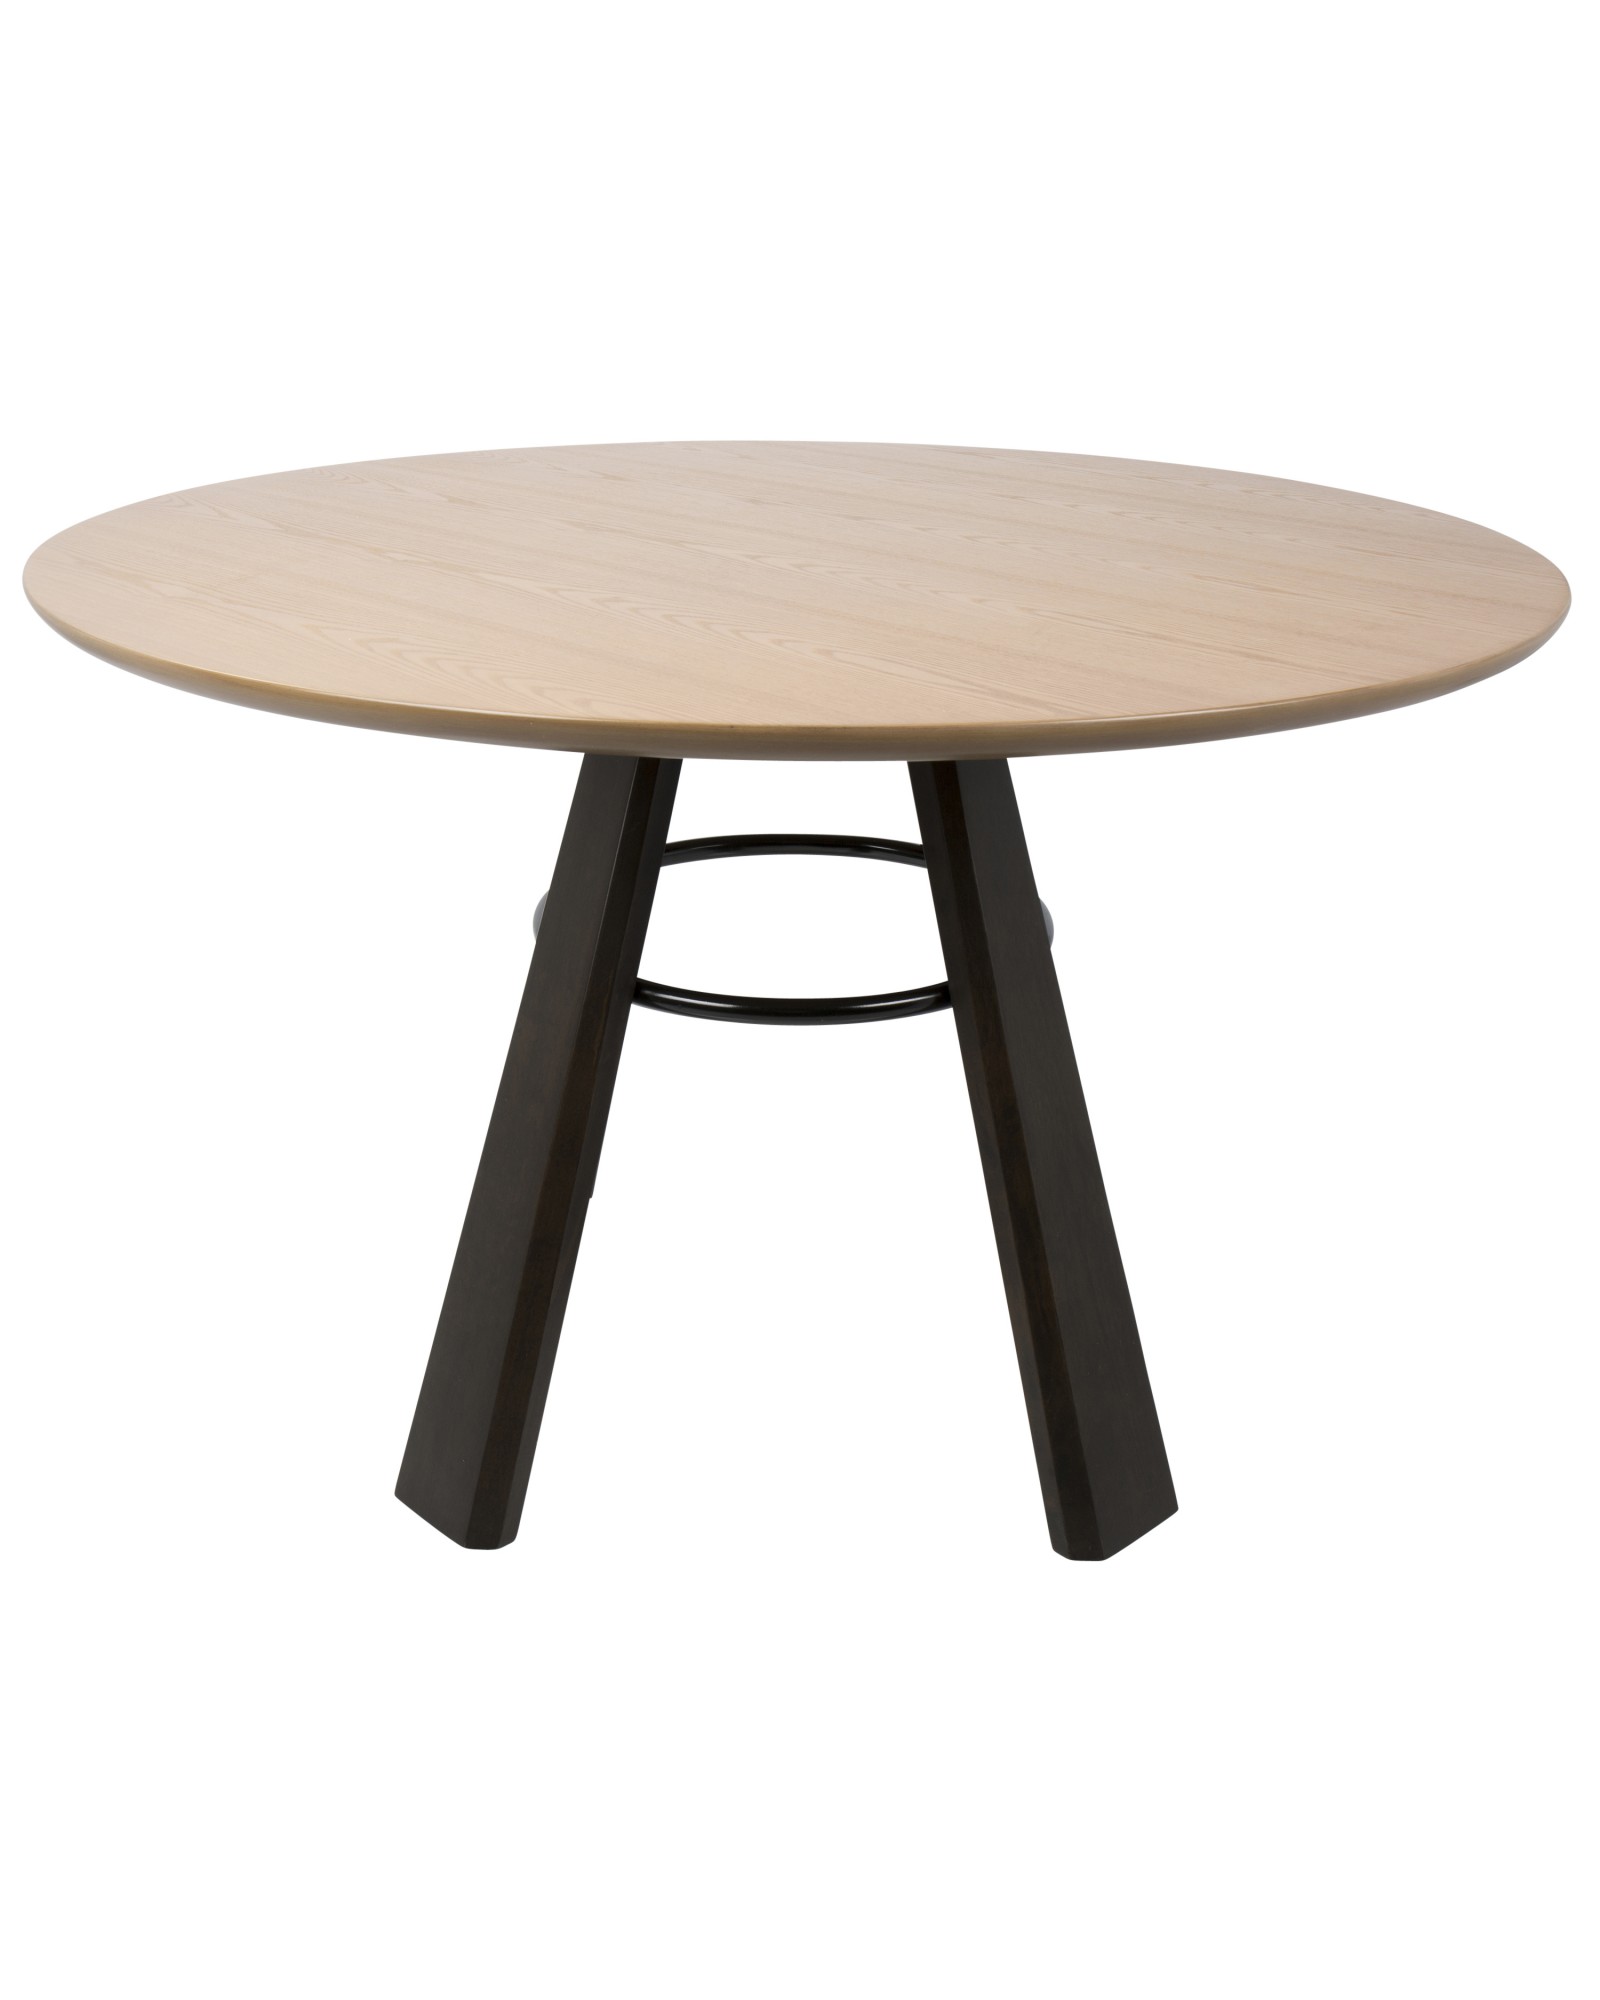 Elton Contemporary Dining Table in Oak Wood and Espresso